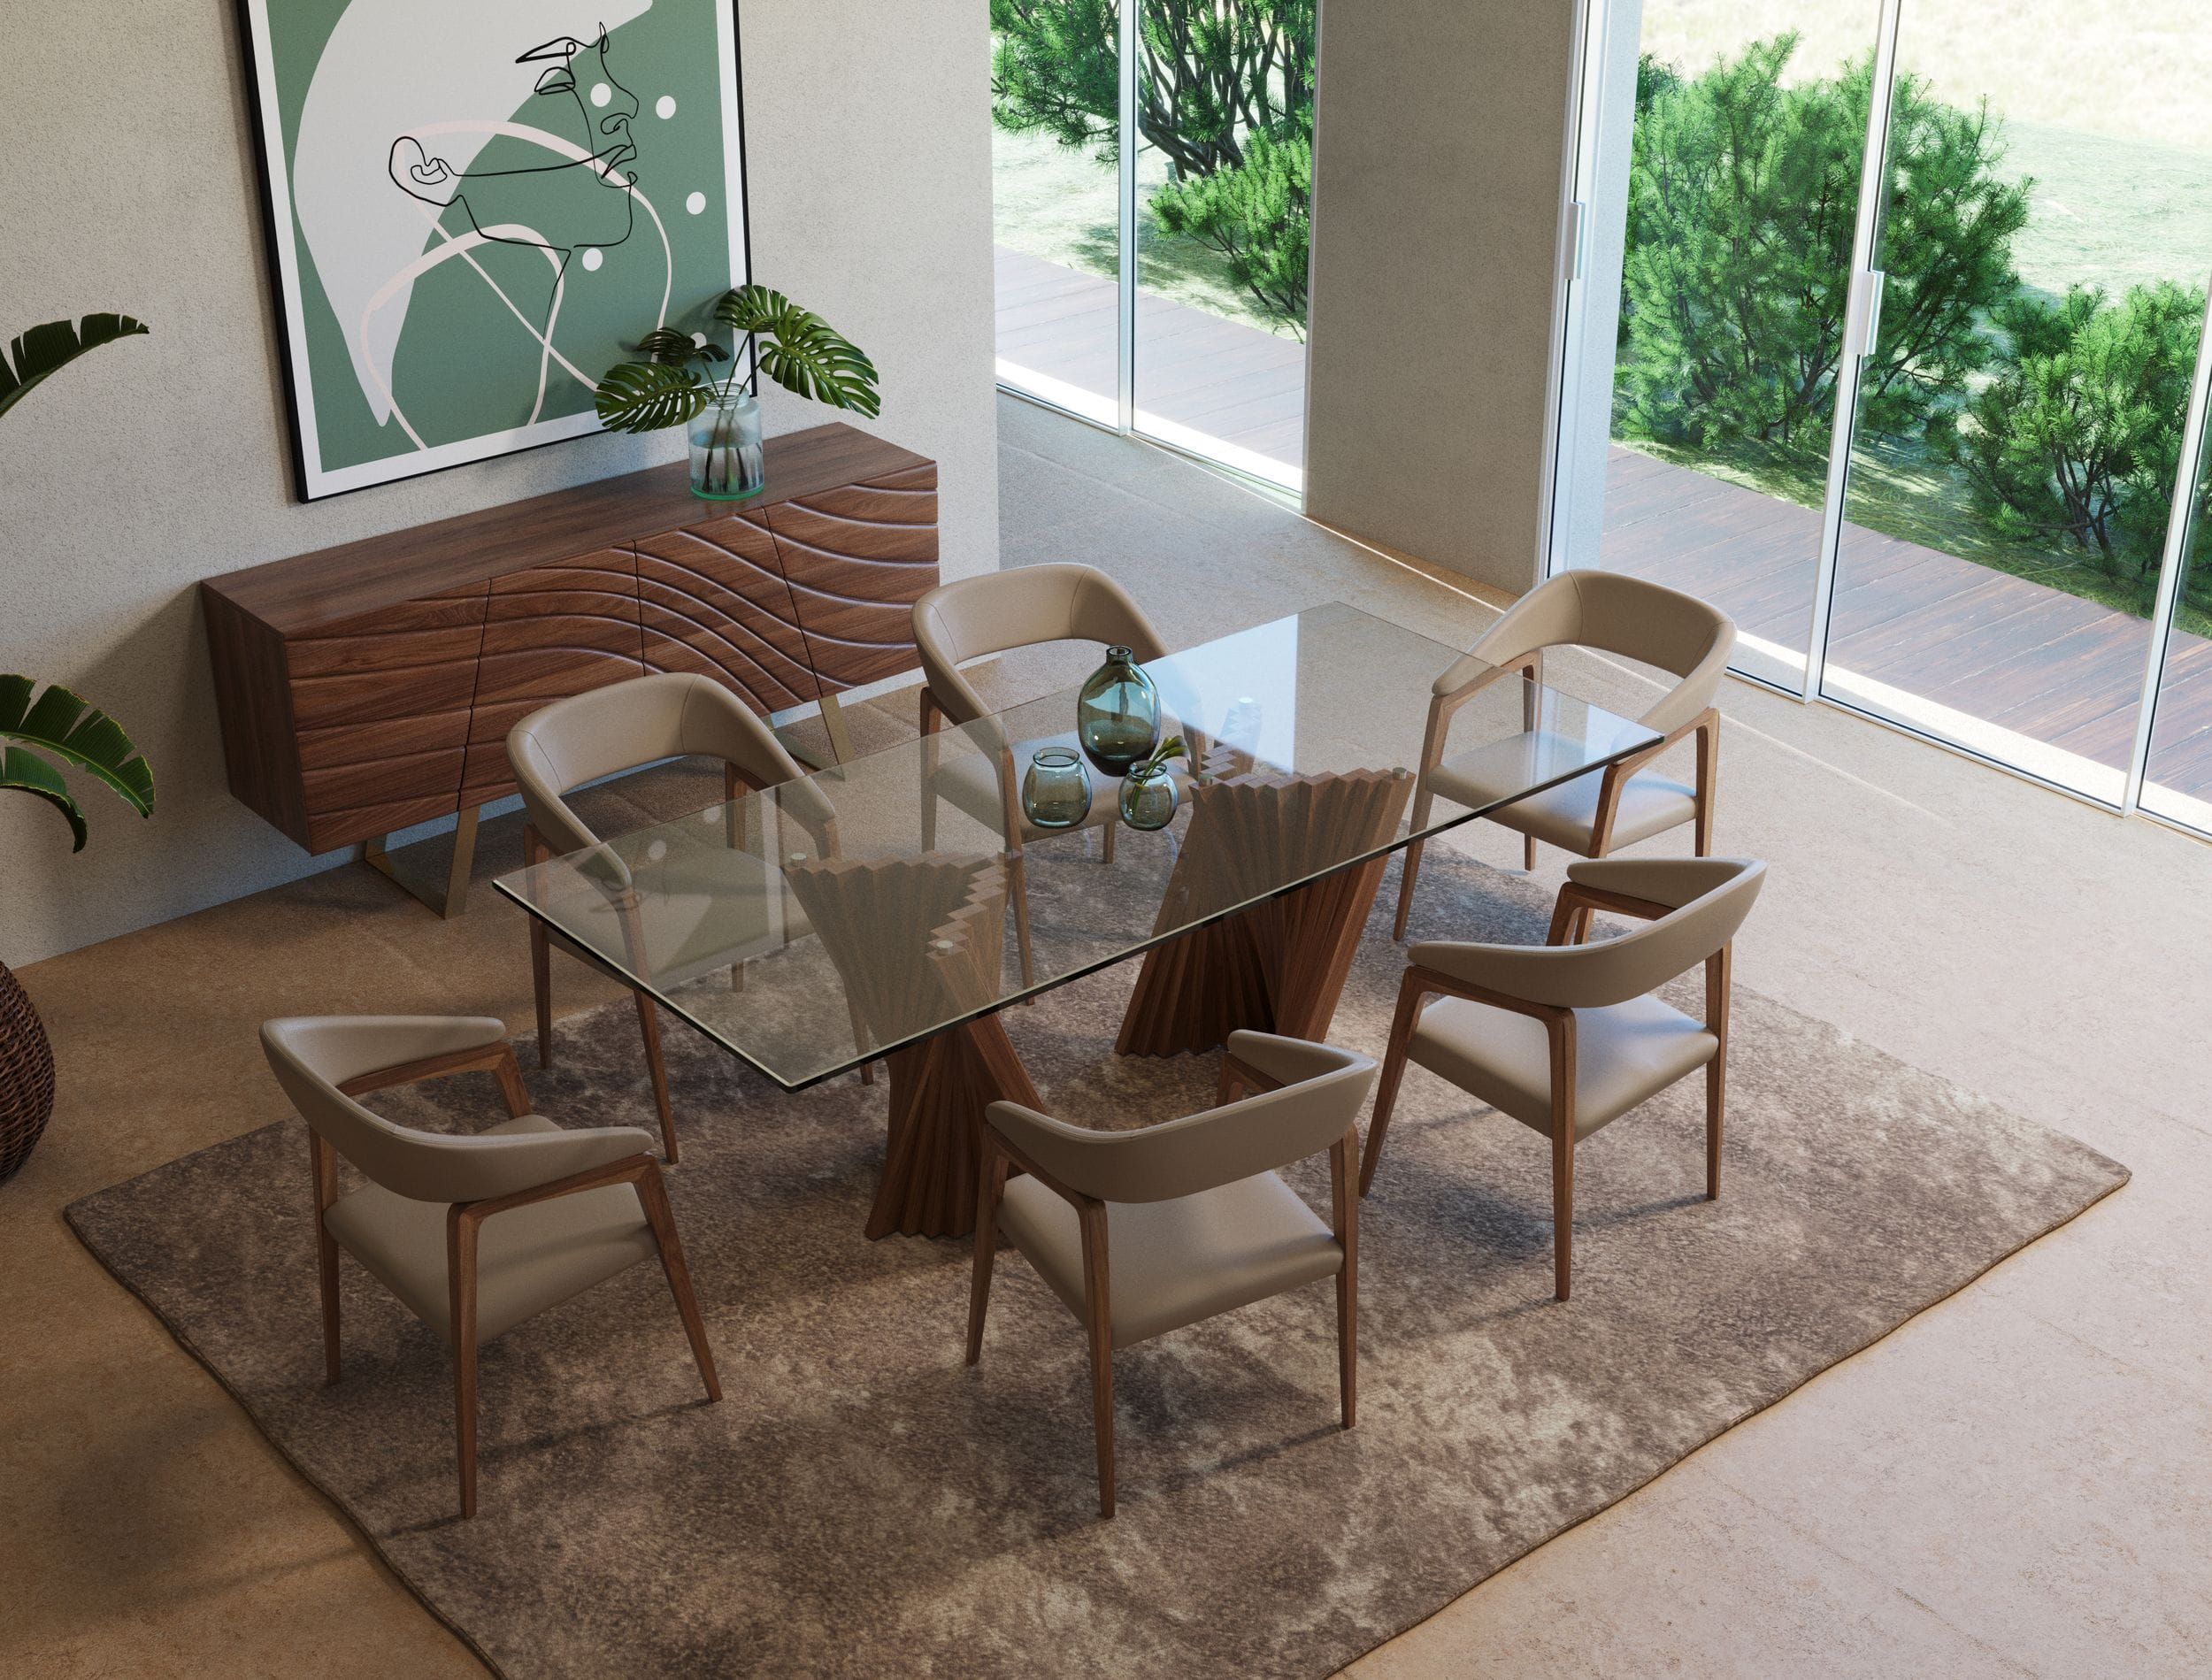 Brown leather chairs around glass and wood dining table